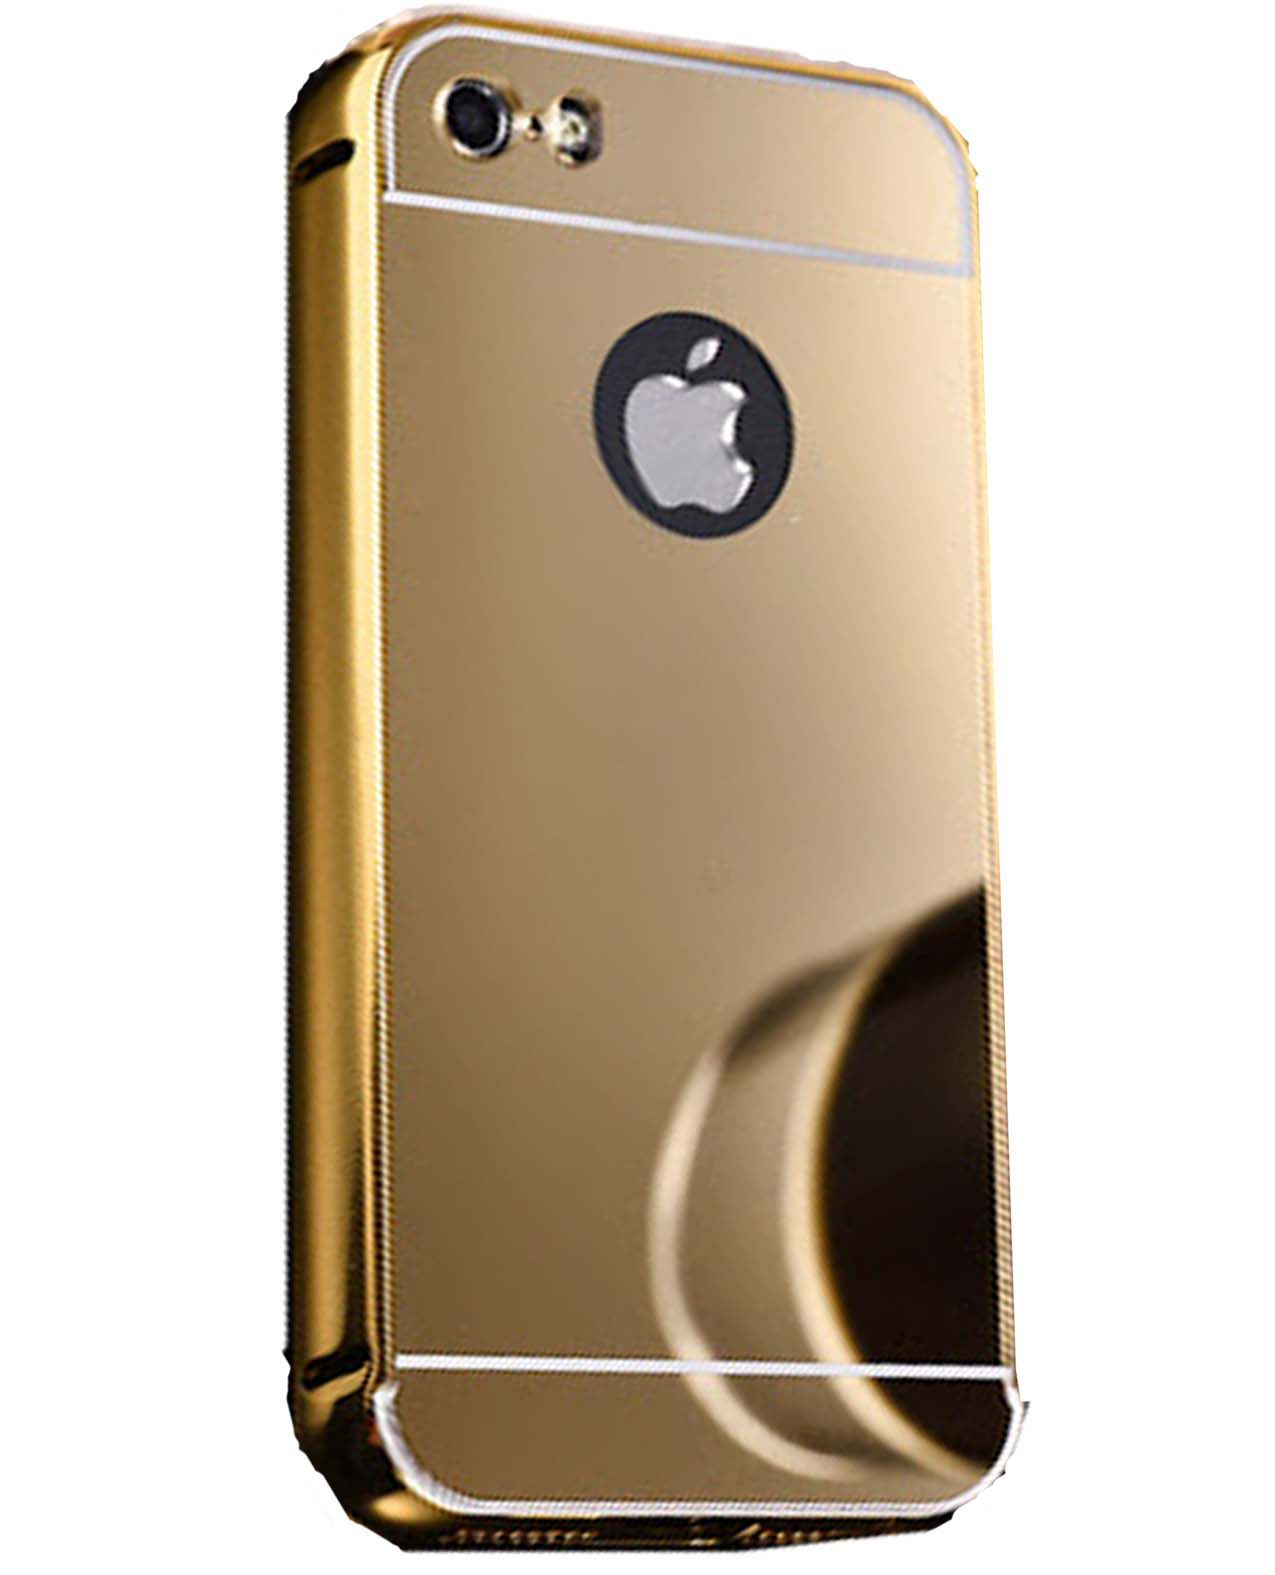 evolutie Boekhouder worst Apple iPhone 5S Cover by JKR - Golden - Plain Back Covers Online at Low  Prices | Snapdeal India